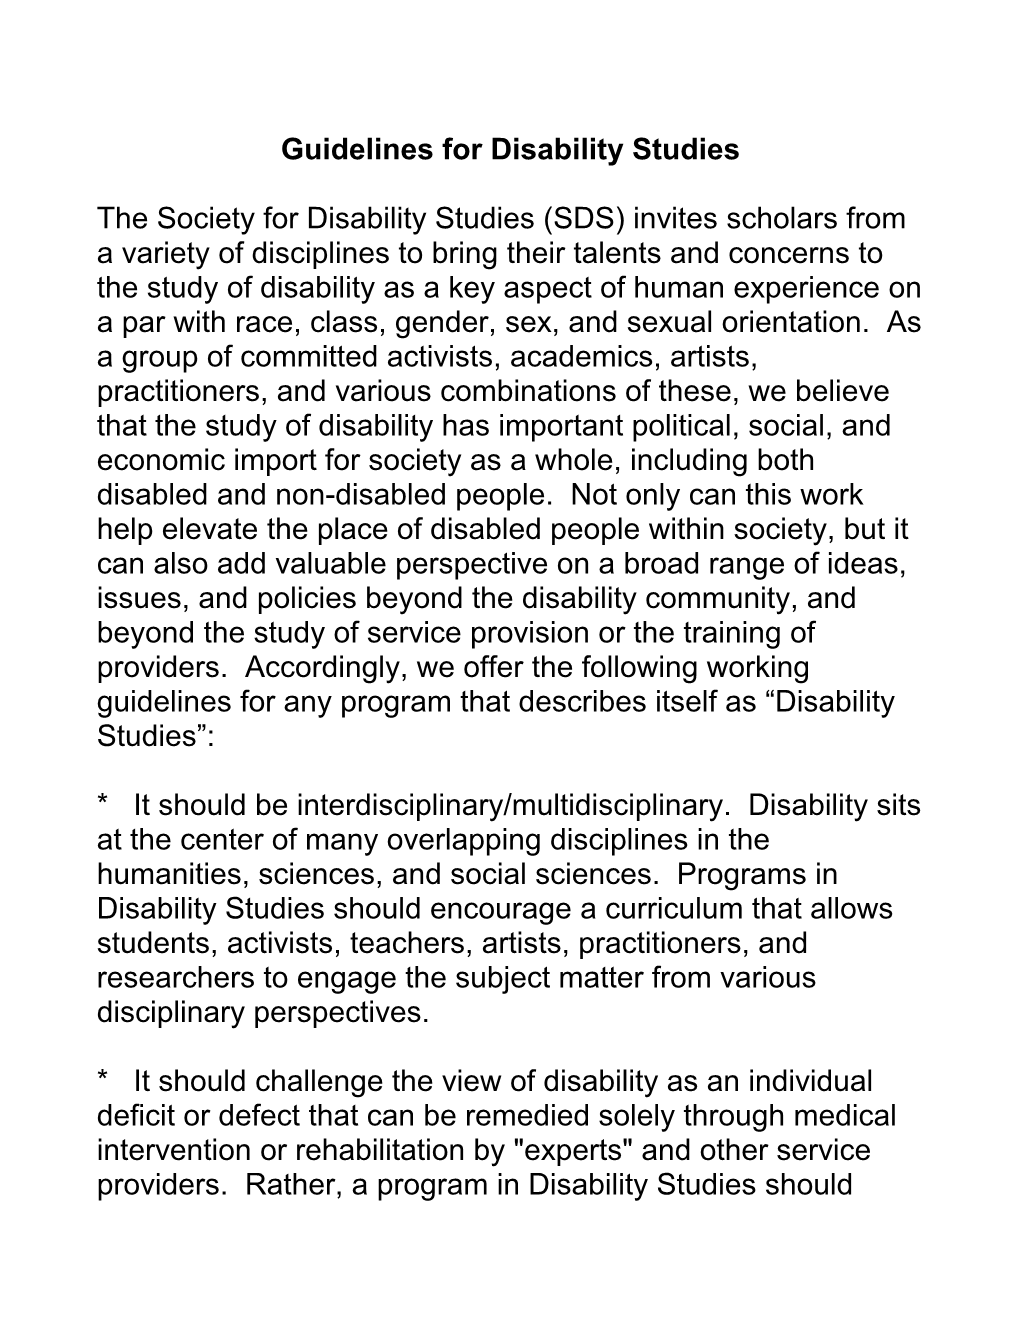 A Modest Proposal: What Is Disability Studies